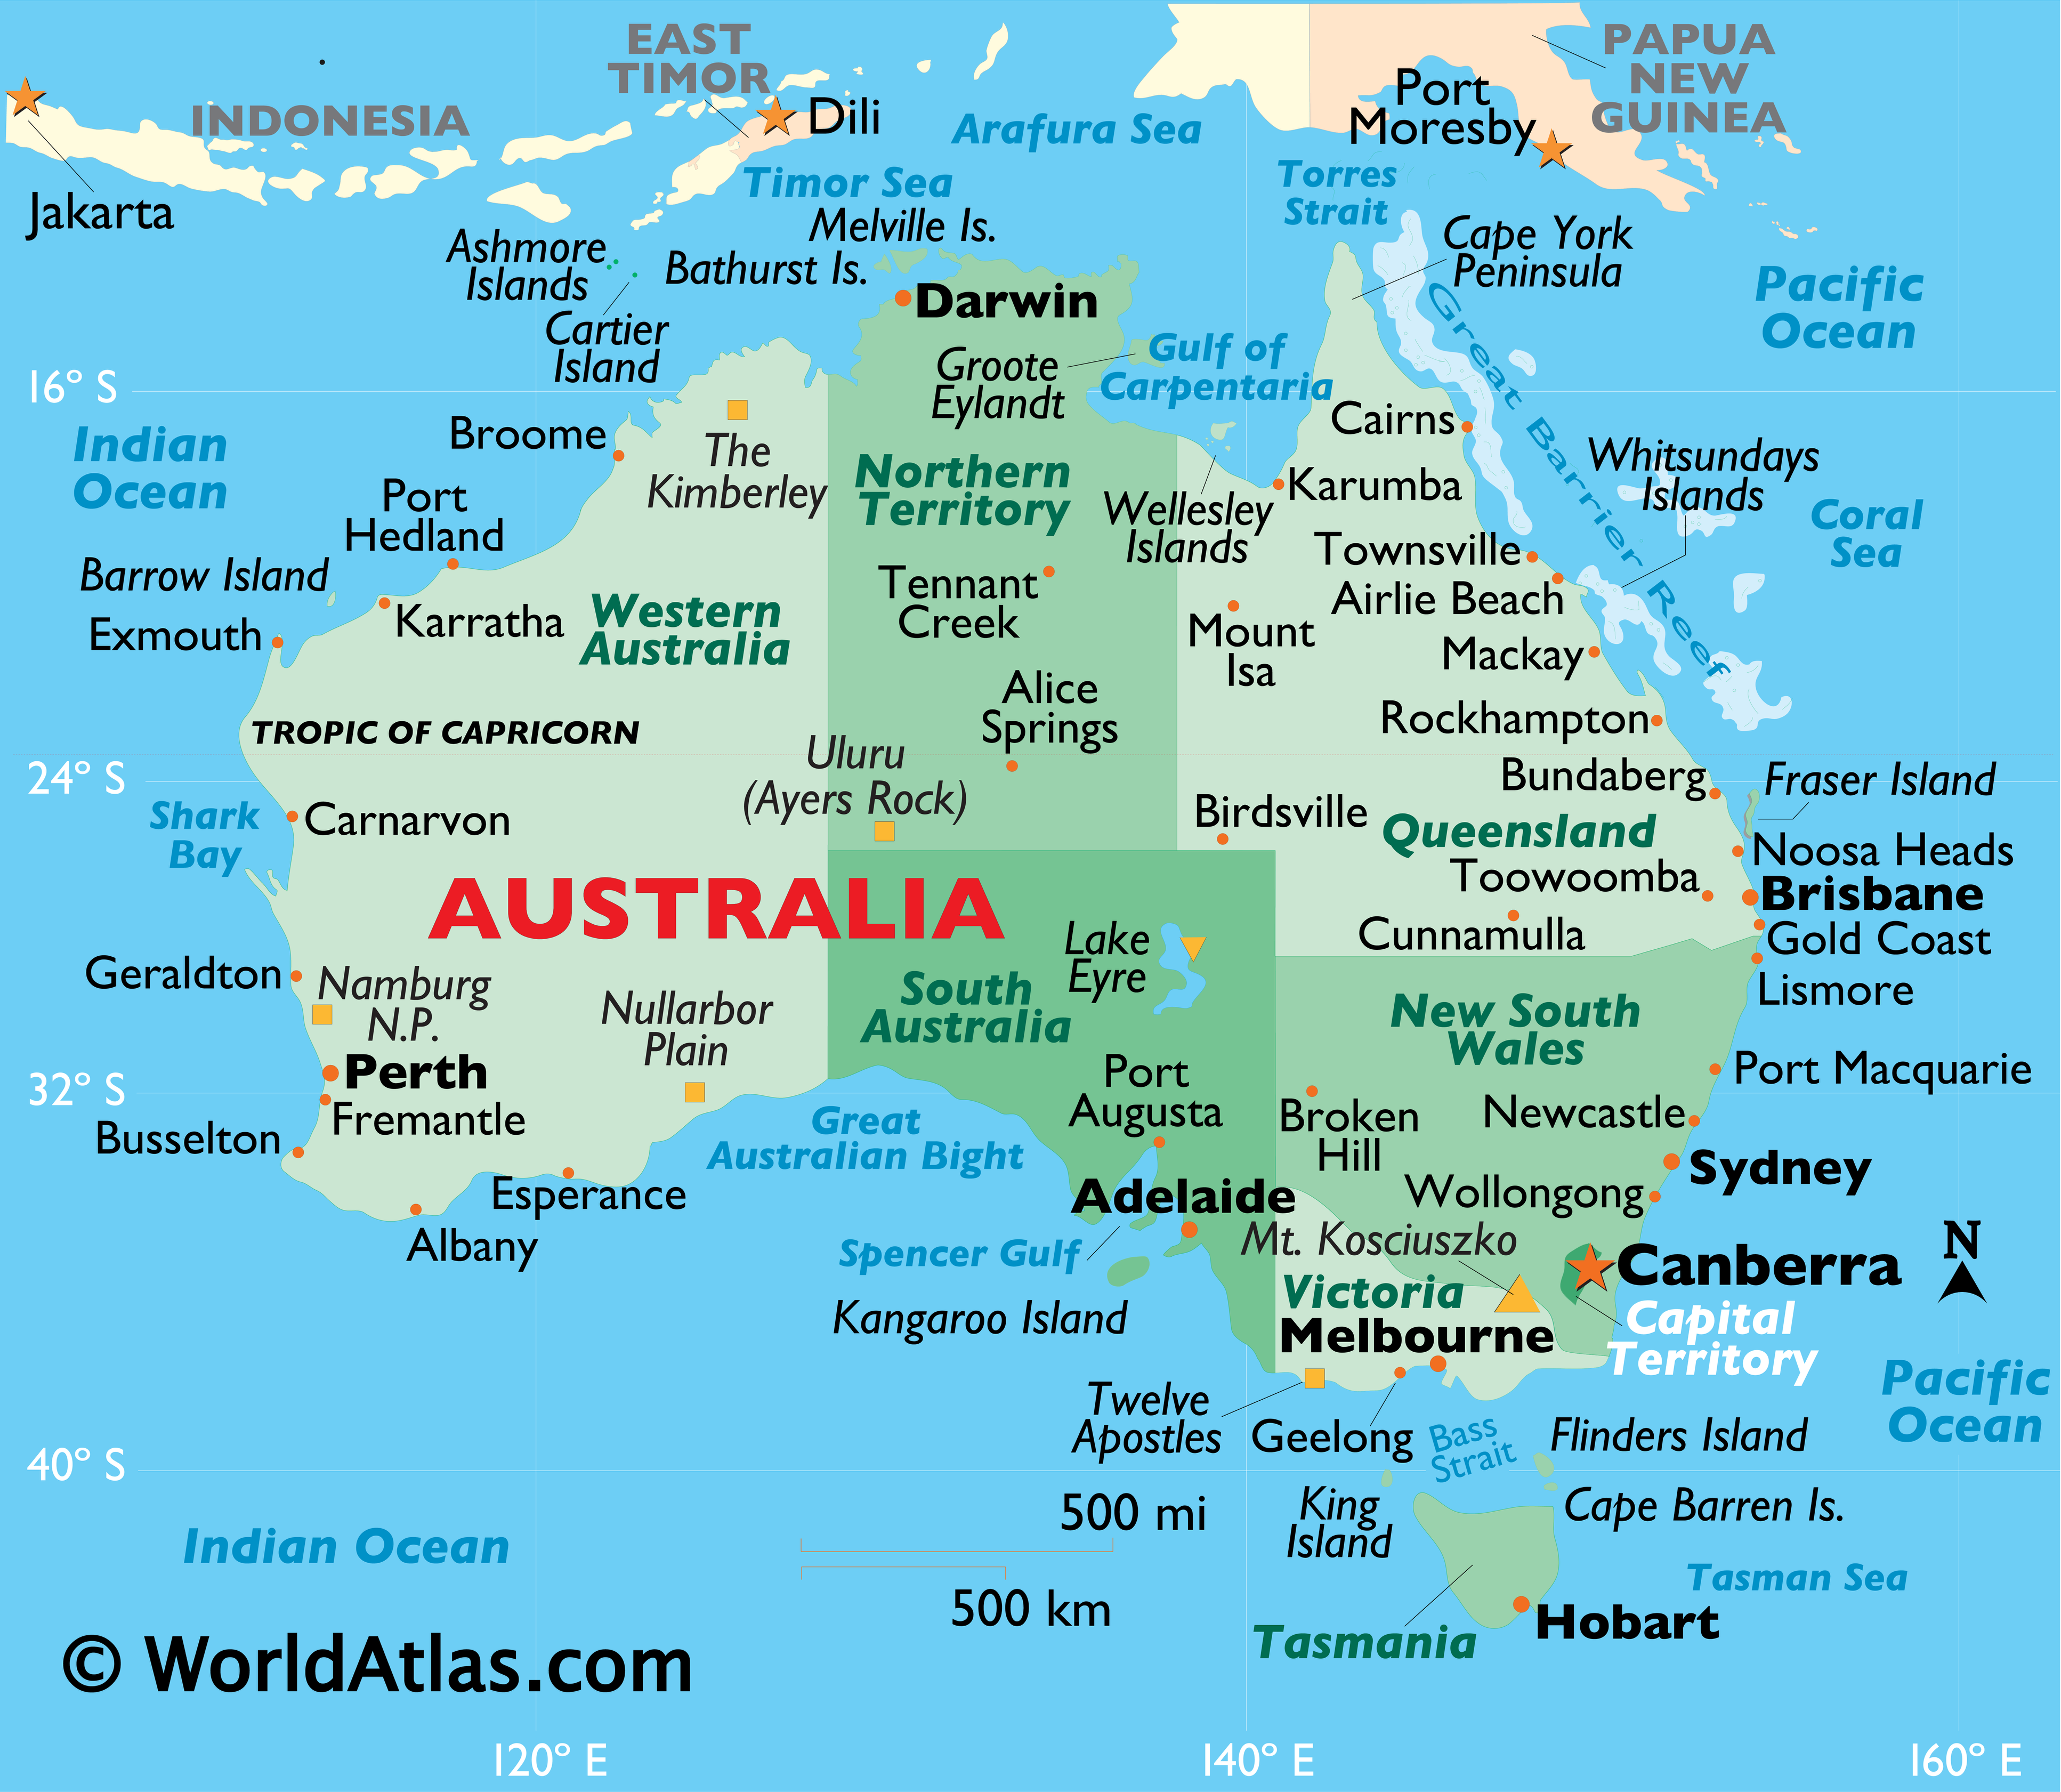 Physical Map of Australia showing islands, peninsulas, lakes, hills, major cities, states, and more.